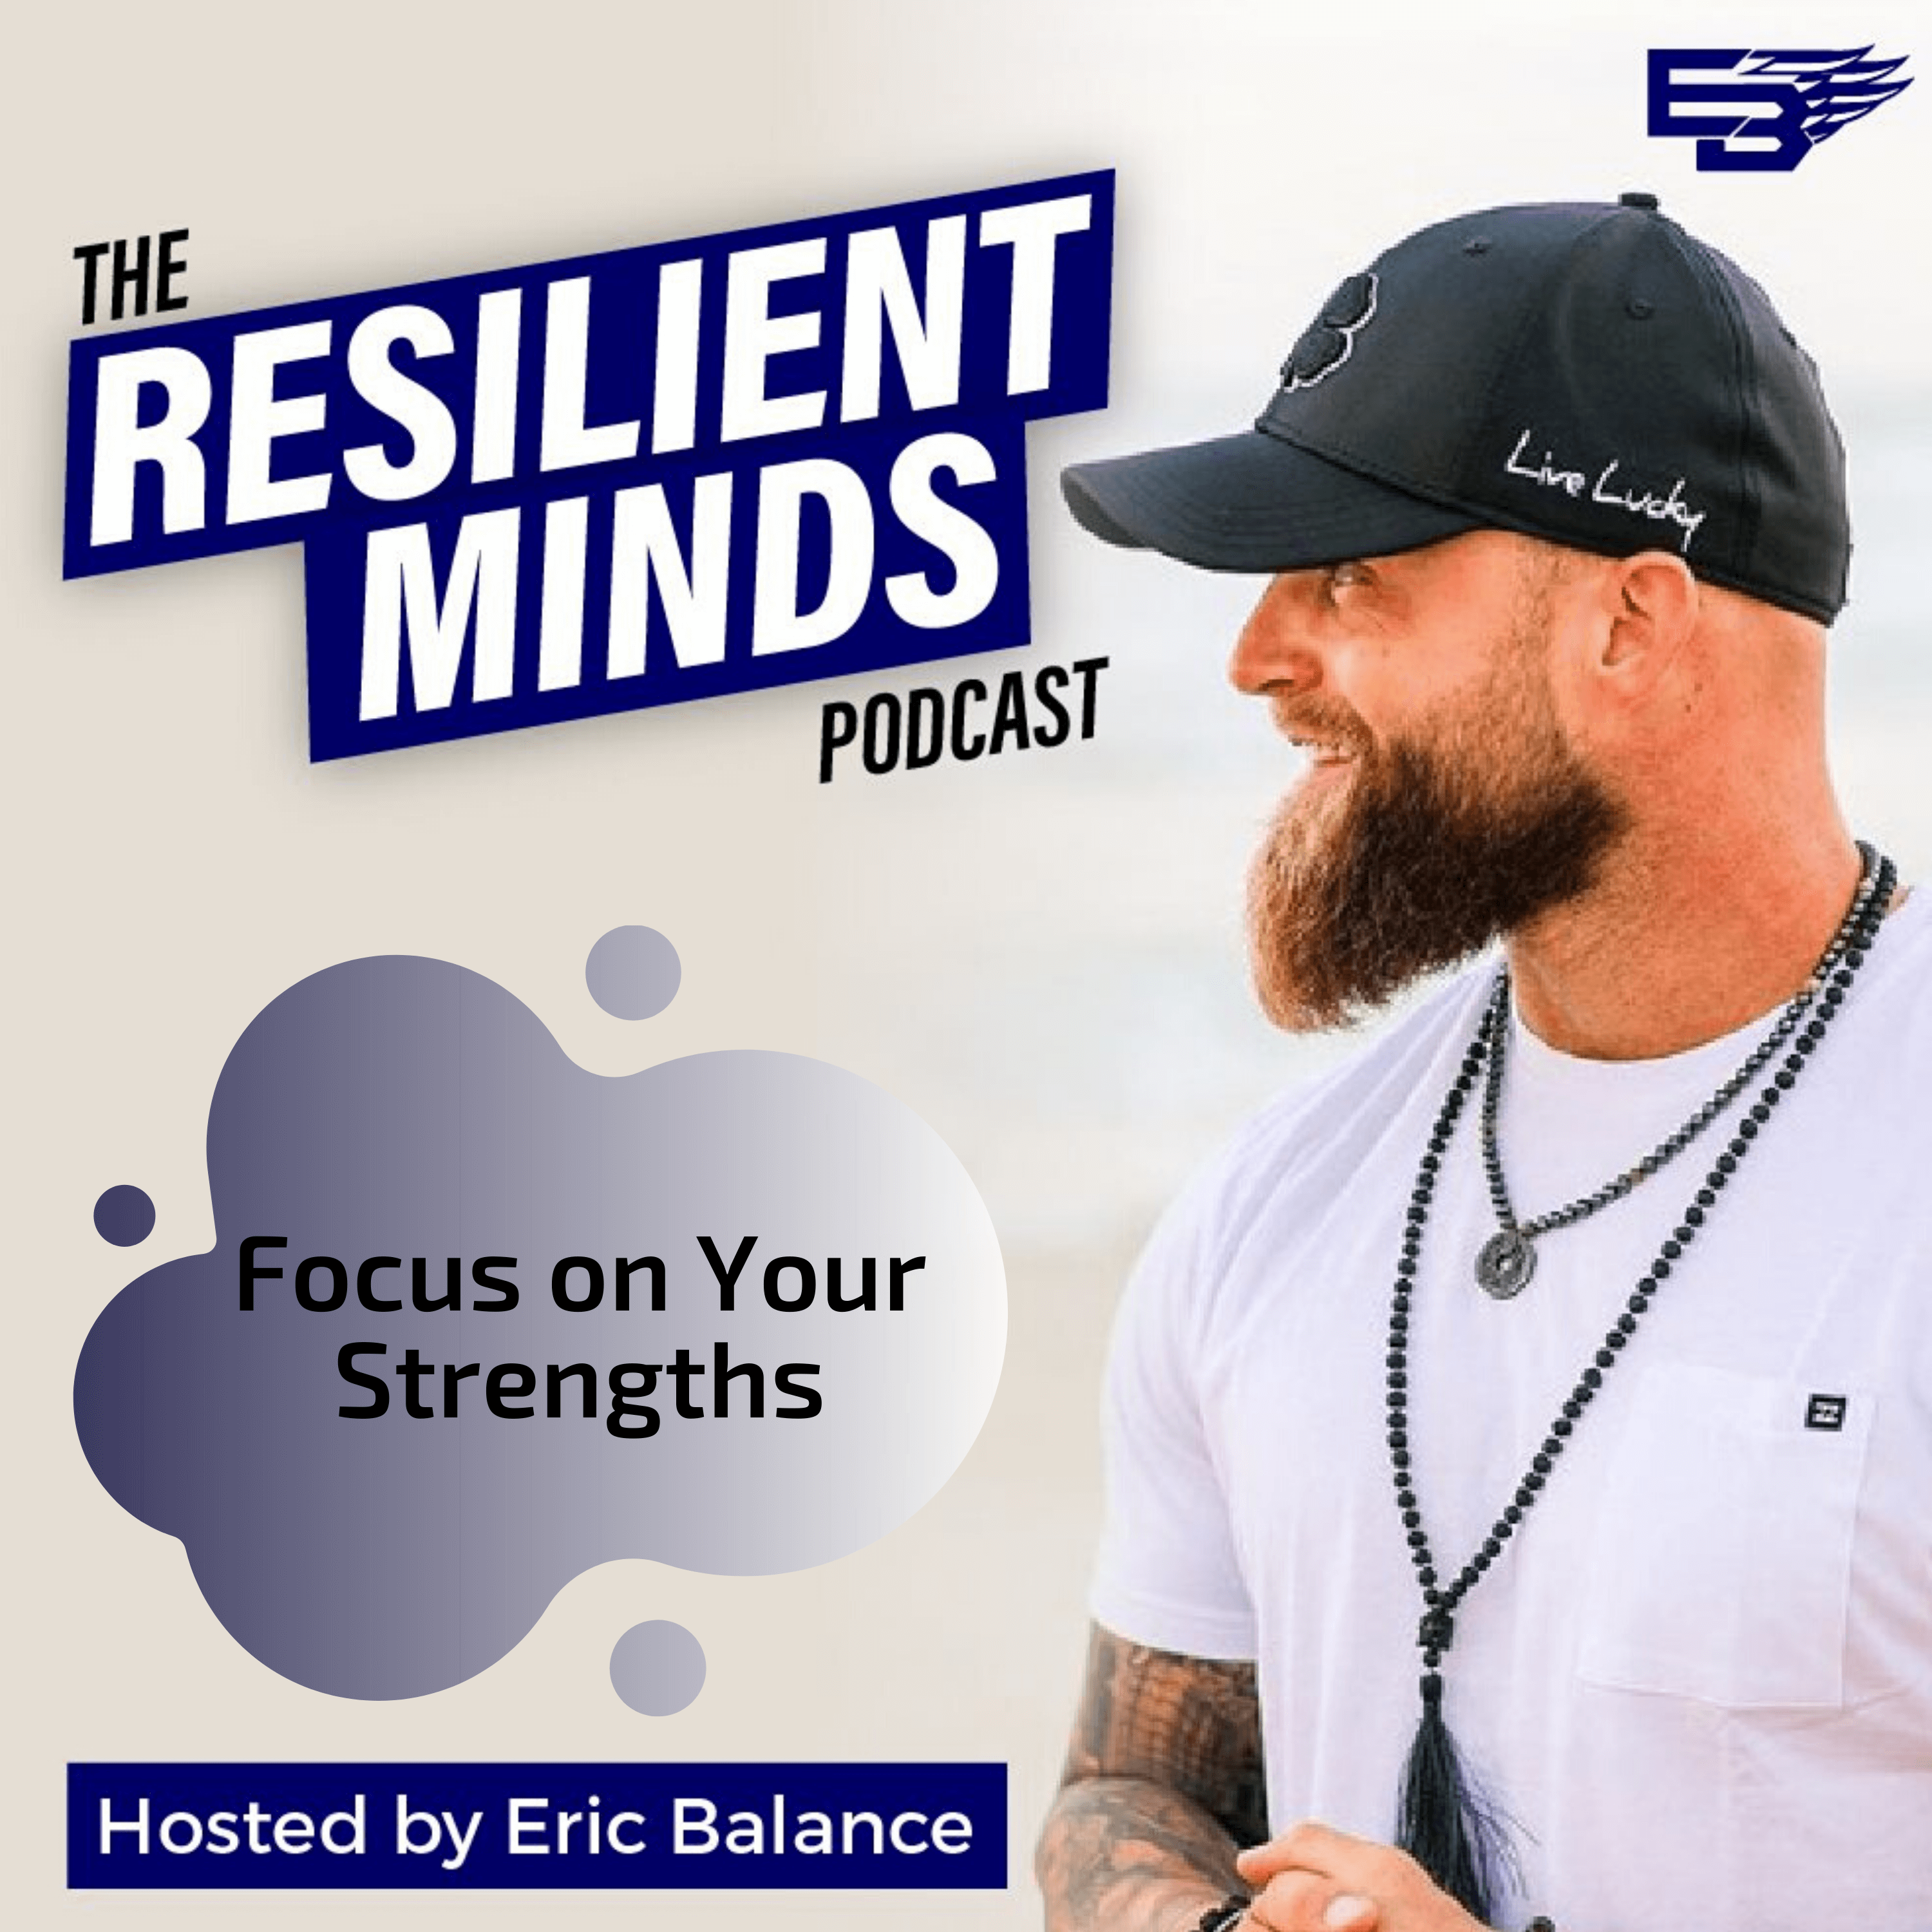 Episode 1 – Focus on Your Strengths.